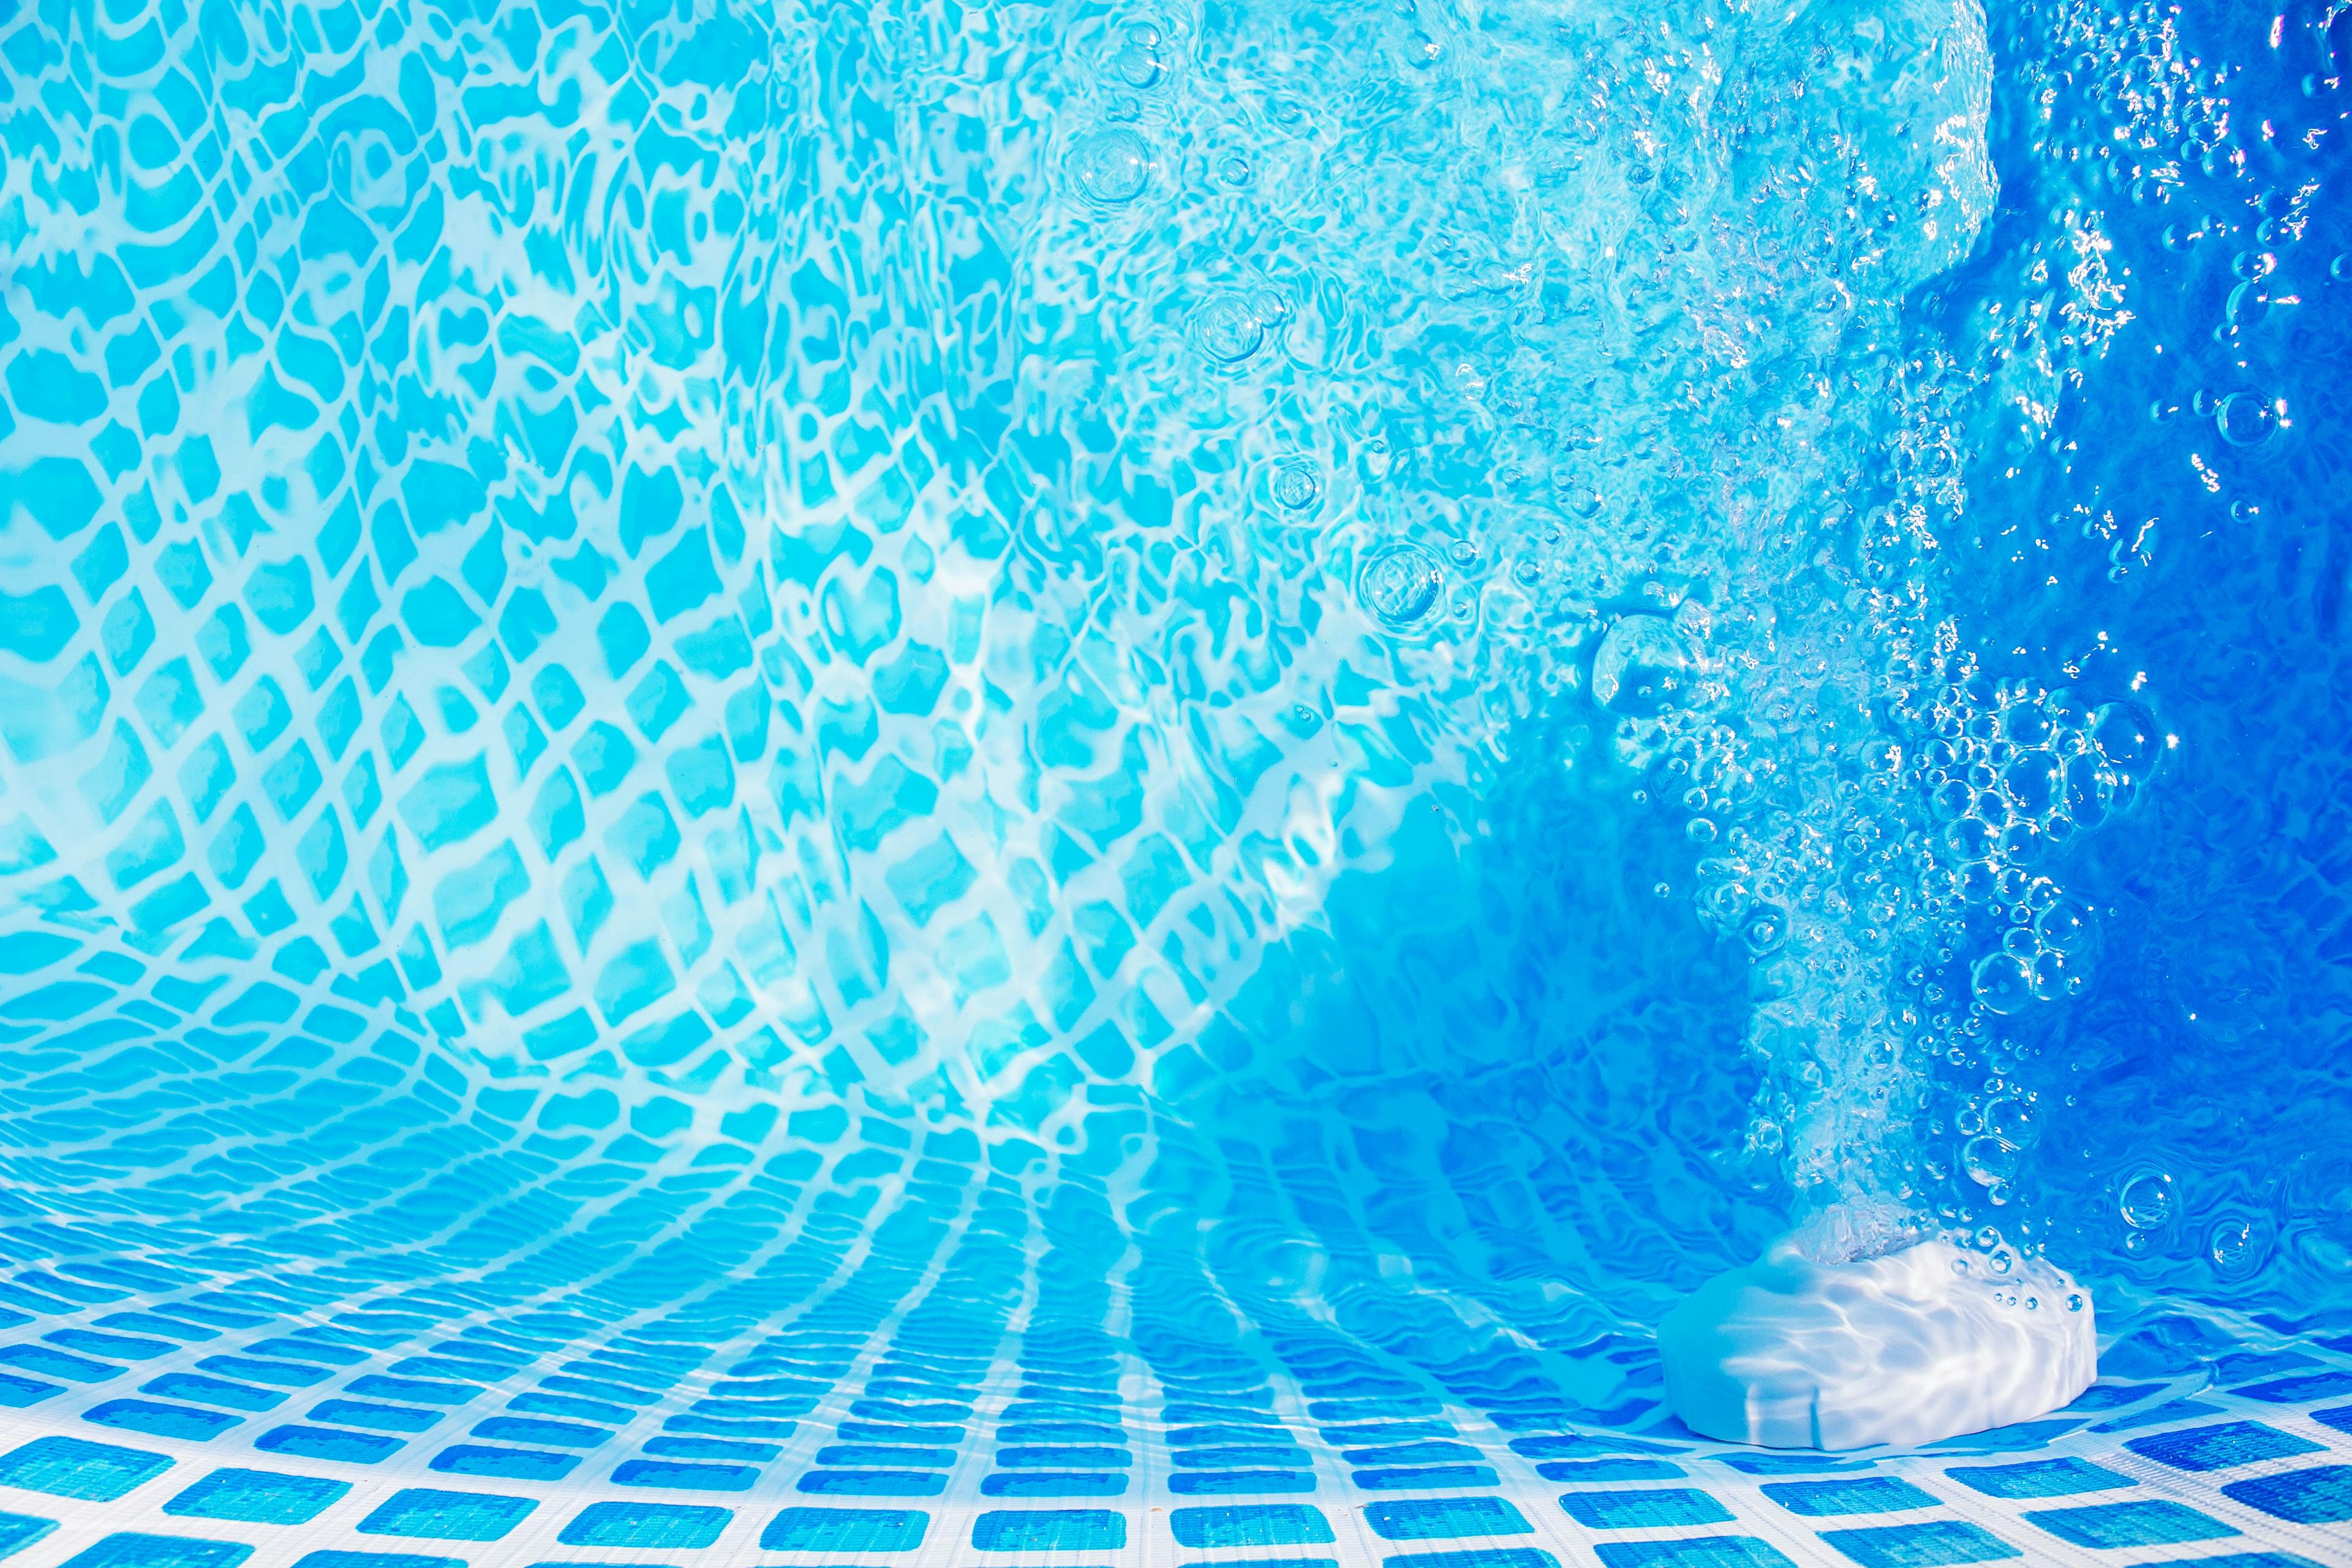 Swimming pool pipe technology. Water filtration. | Image Credit: © Antibydni - stock.adobe.com